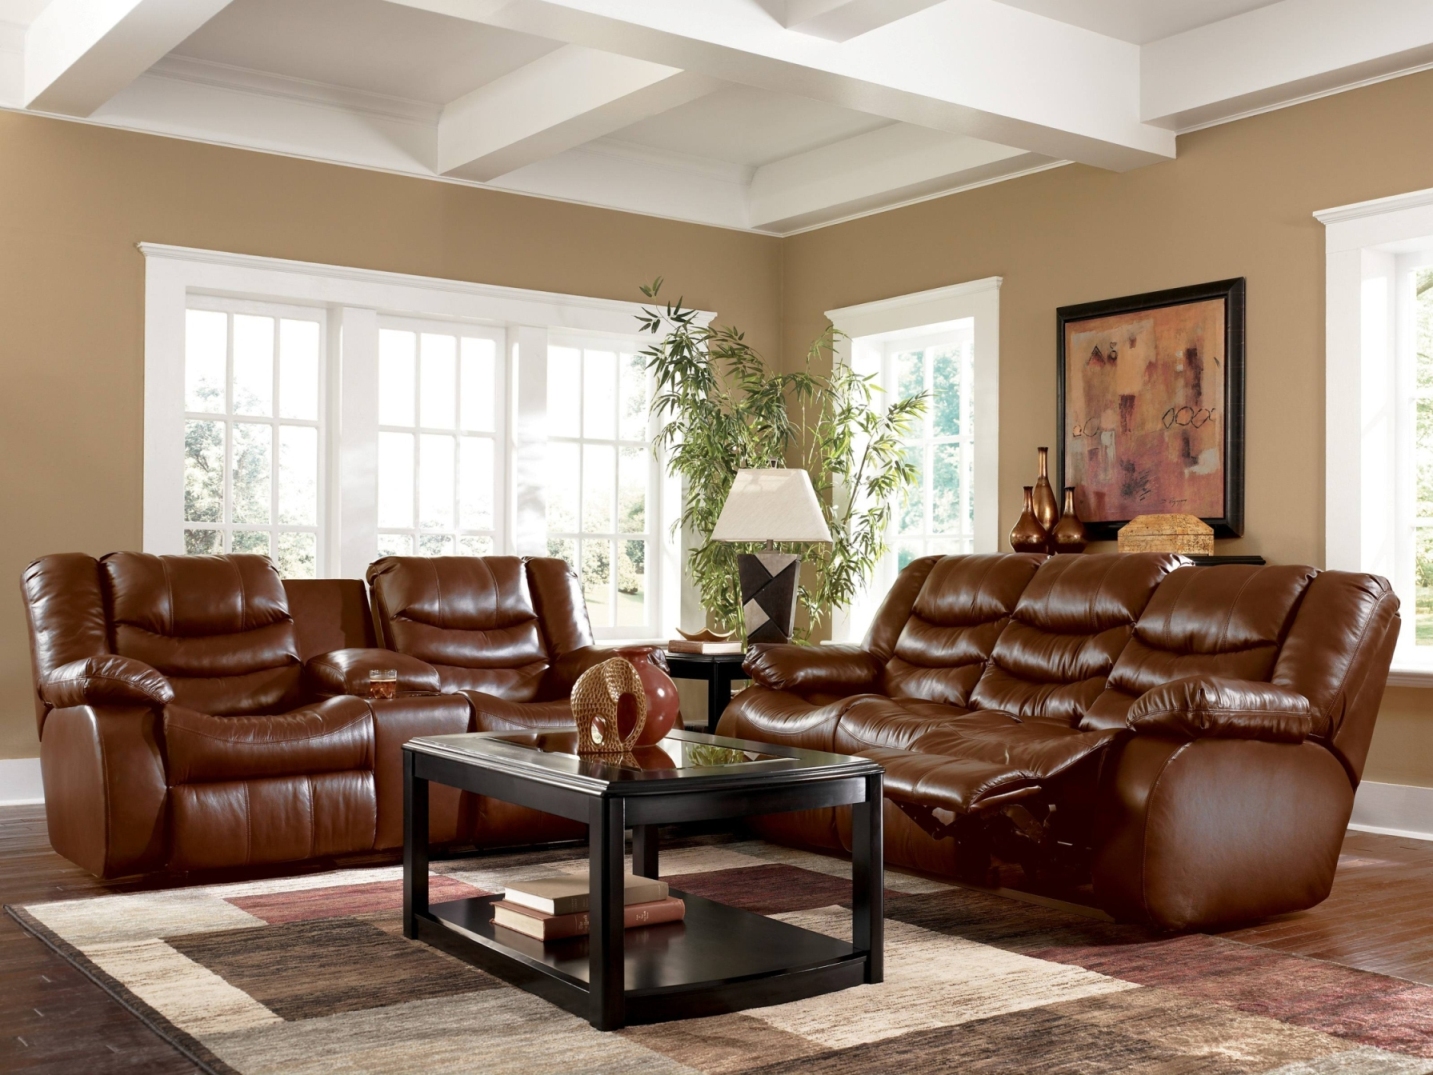 Black And Brown Living Room Decor Ideas